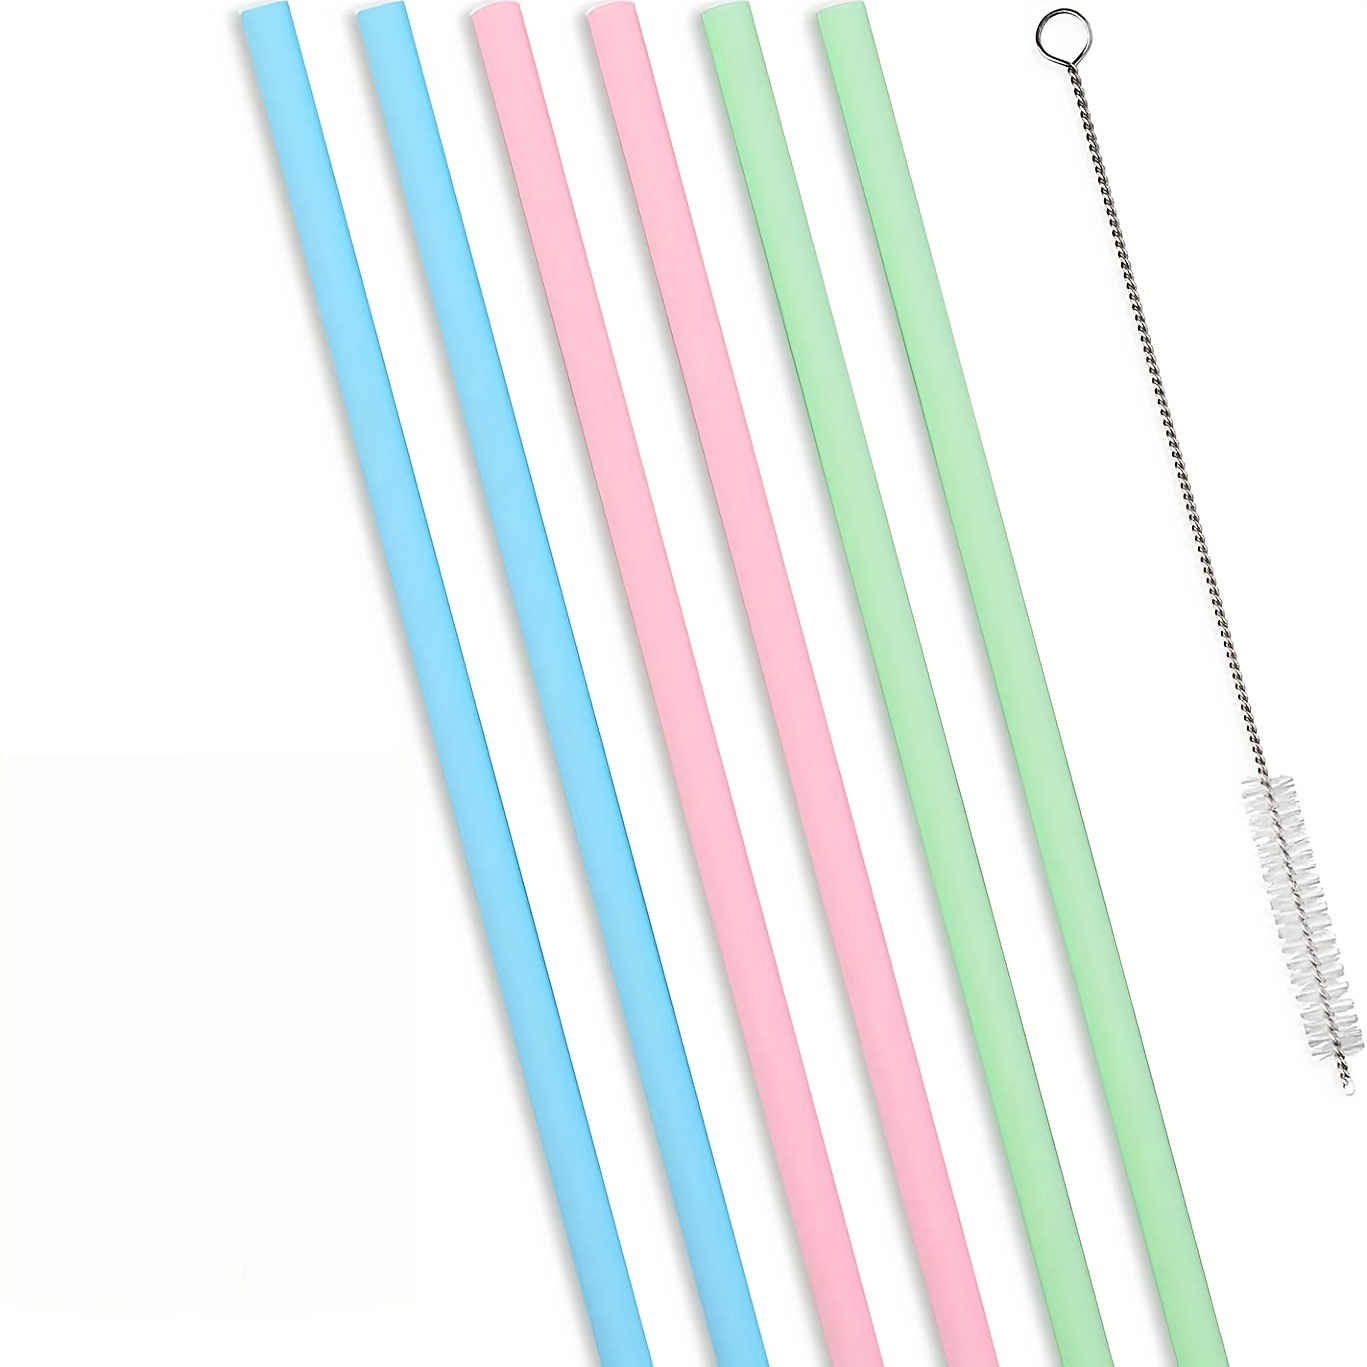 Silicone Straw for 40oz 30oz Cup,Reusable Smoothie Flexible Straw